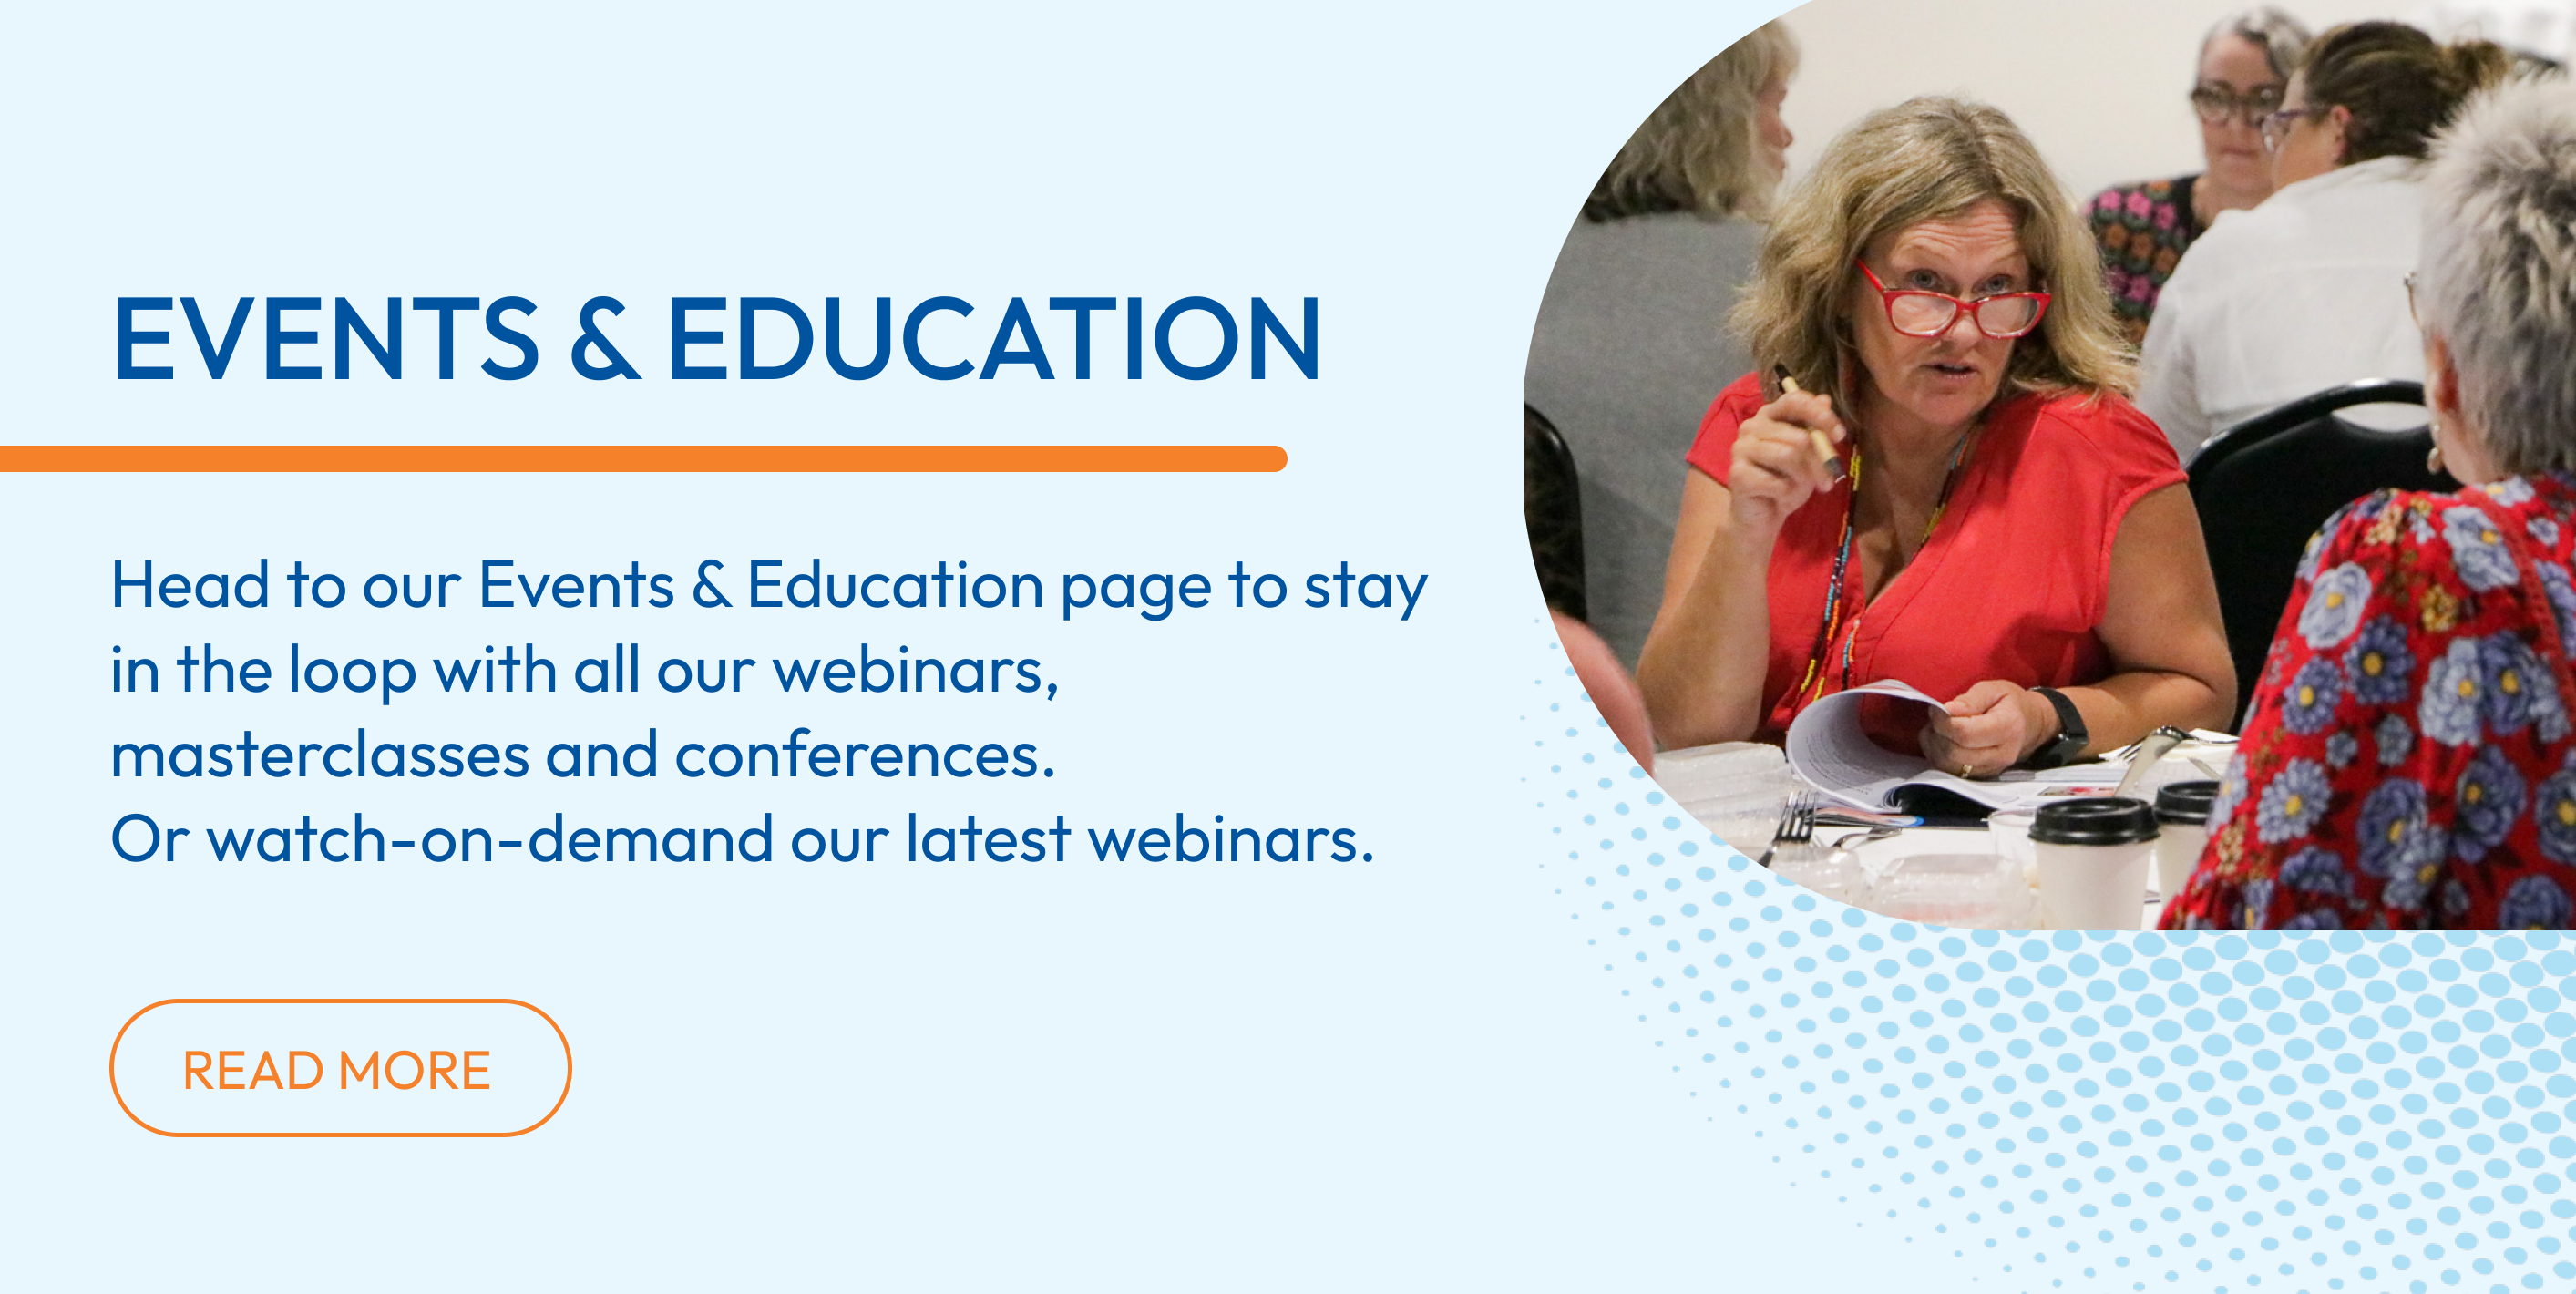 Events and Education tile. Tile text: Head to our Events & Education page to stay in the loop with all our webinars, masterclasses and conference. Or watch-on-demand our latest webinars. Read more link leading to https://www.teammed.com.au/events/